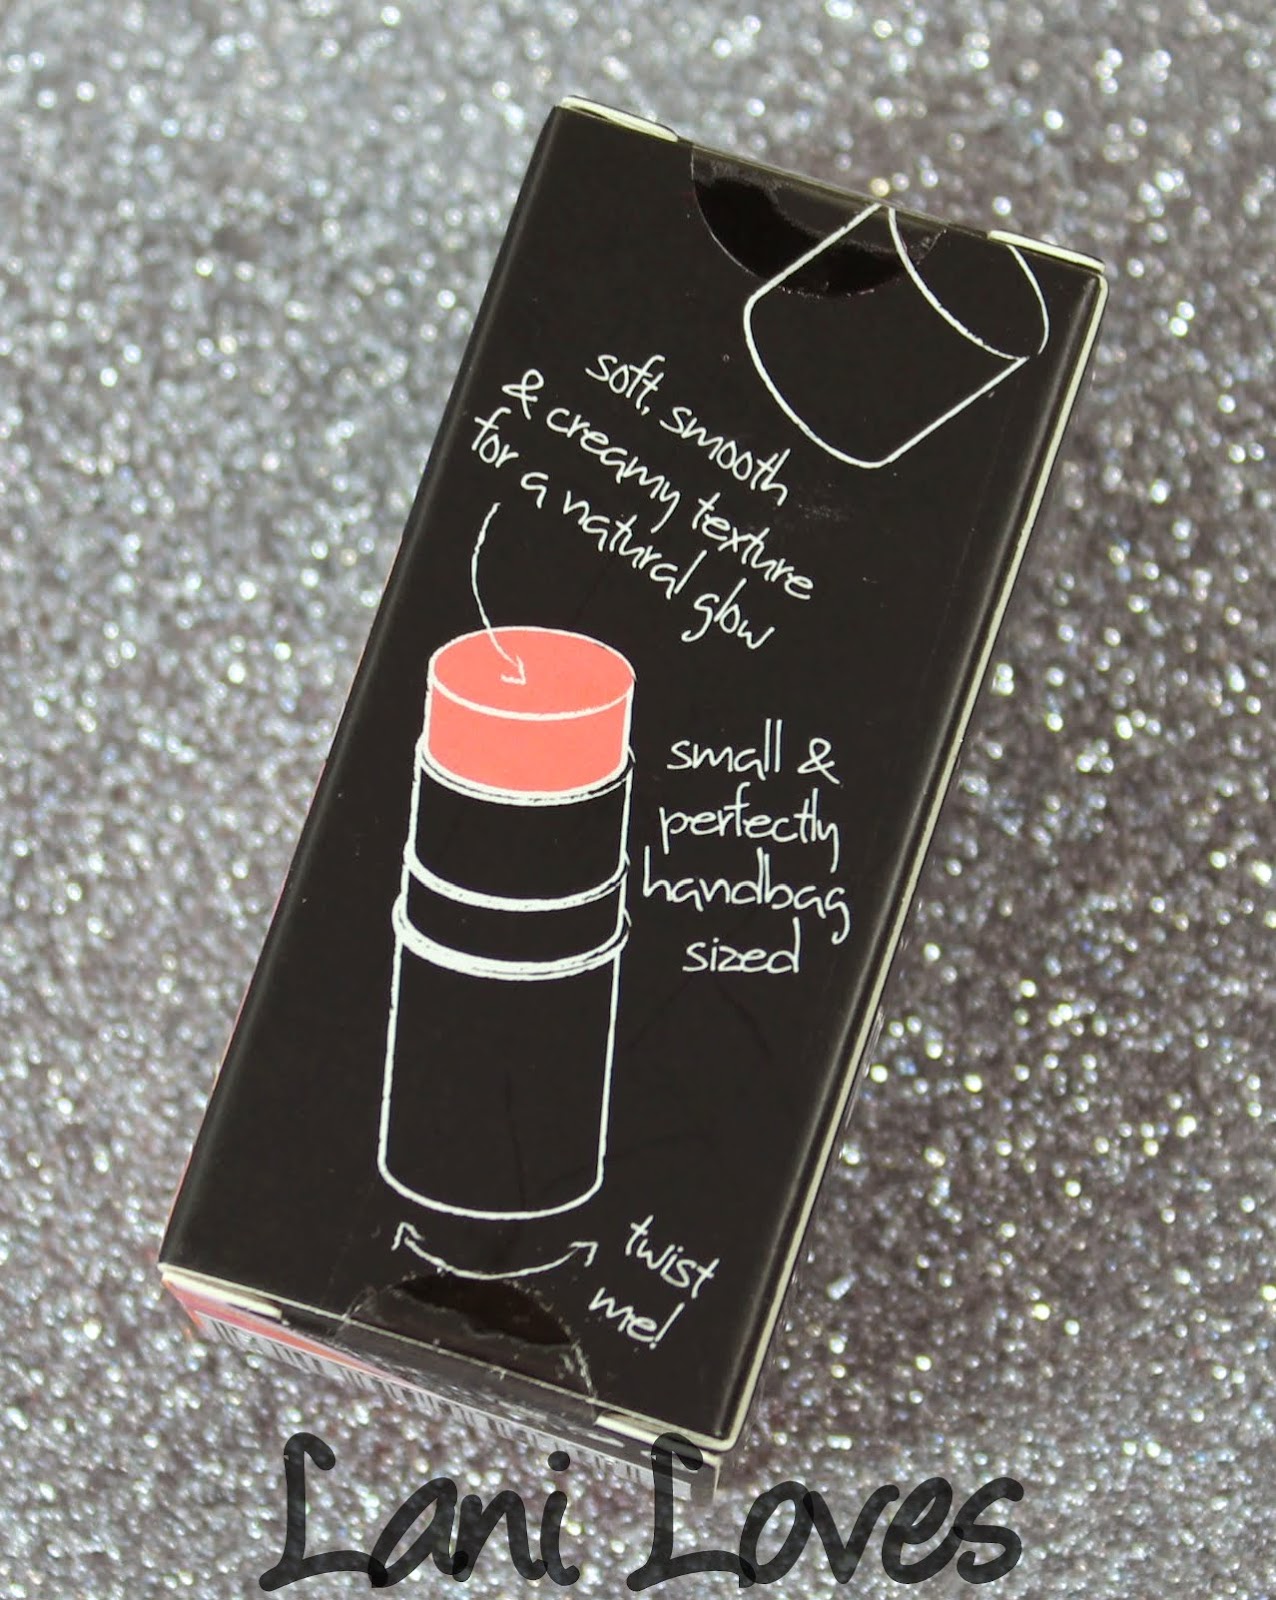 NV Colour Cheeky Stick - Chilli Chops Swatches & Review